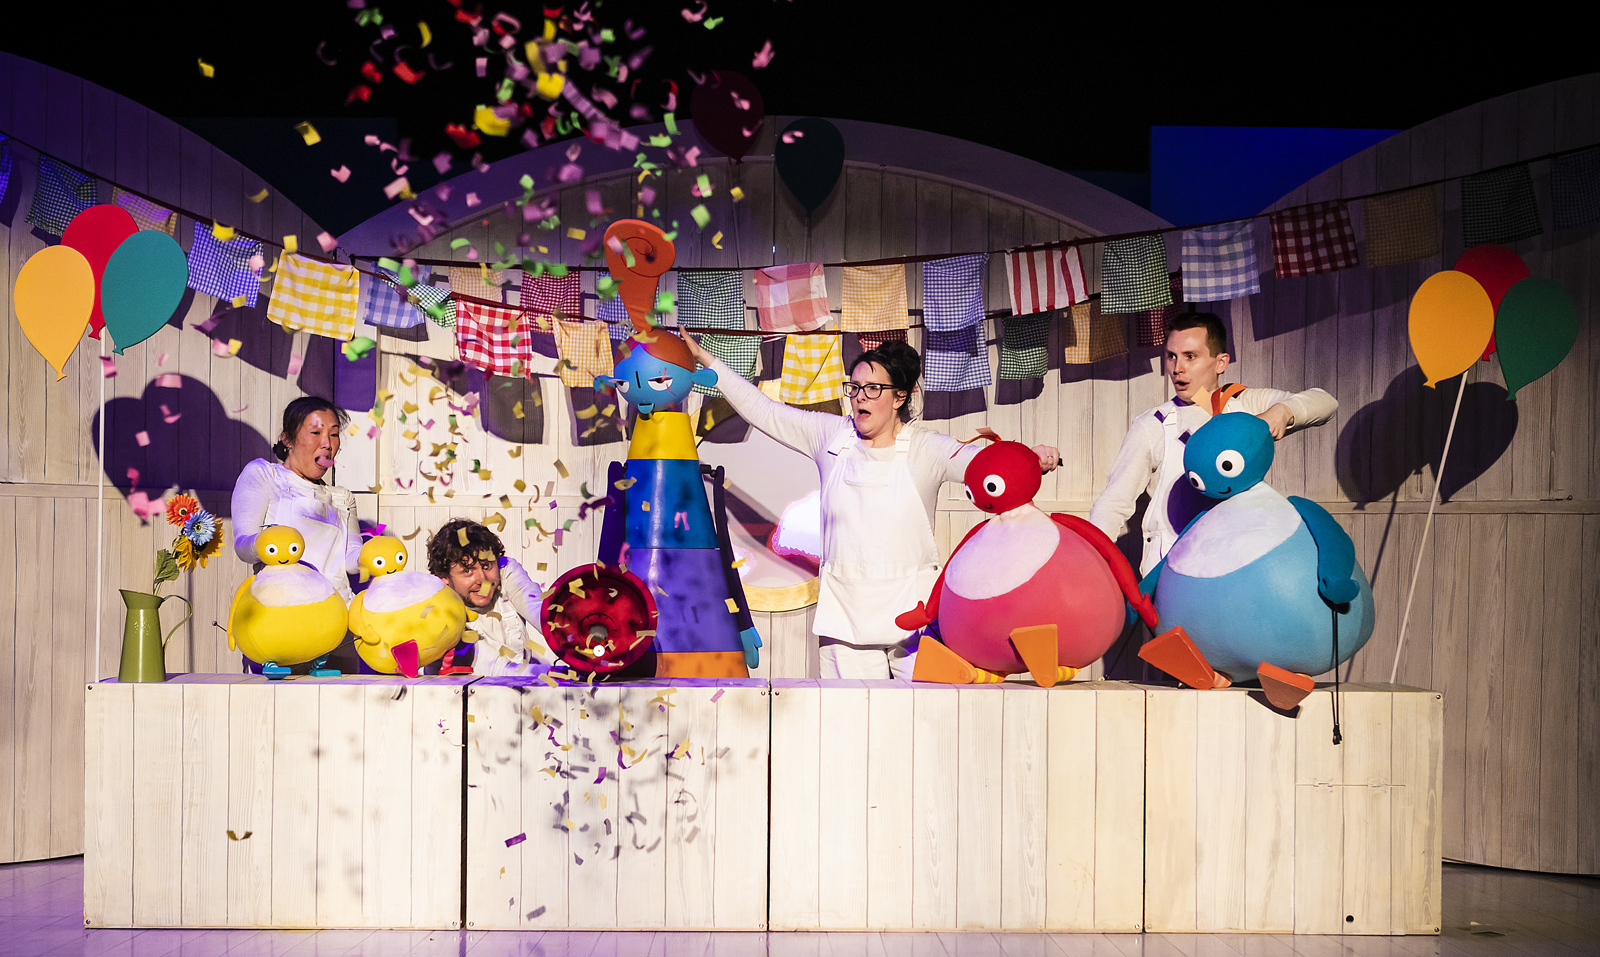 Twirlywoo puppets with confetti